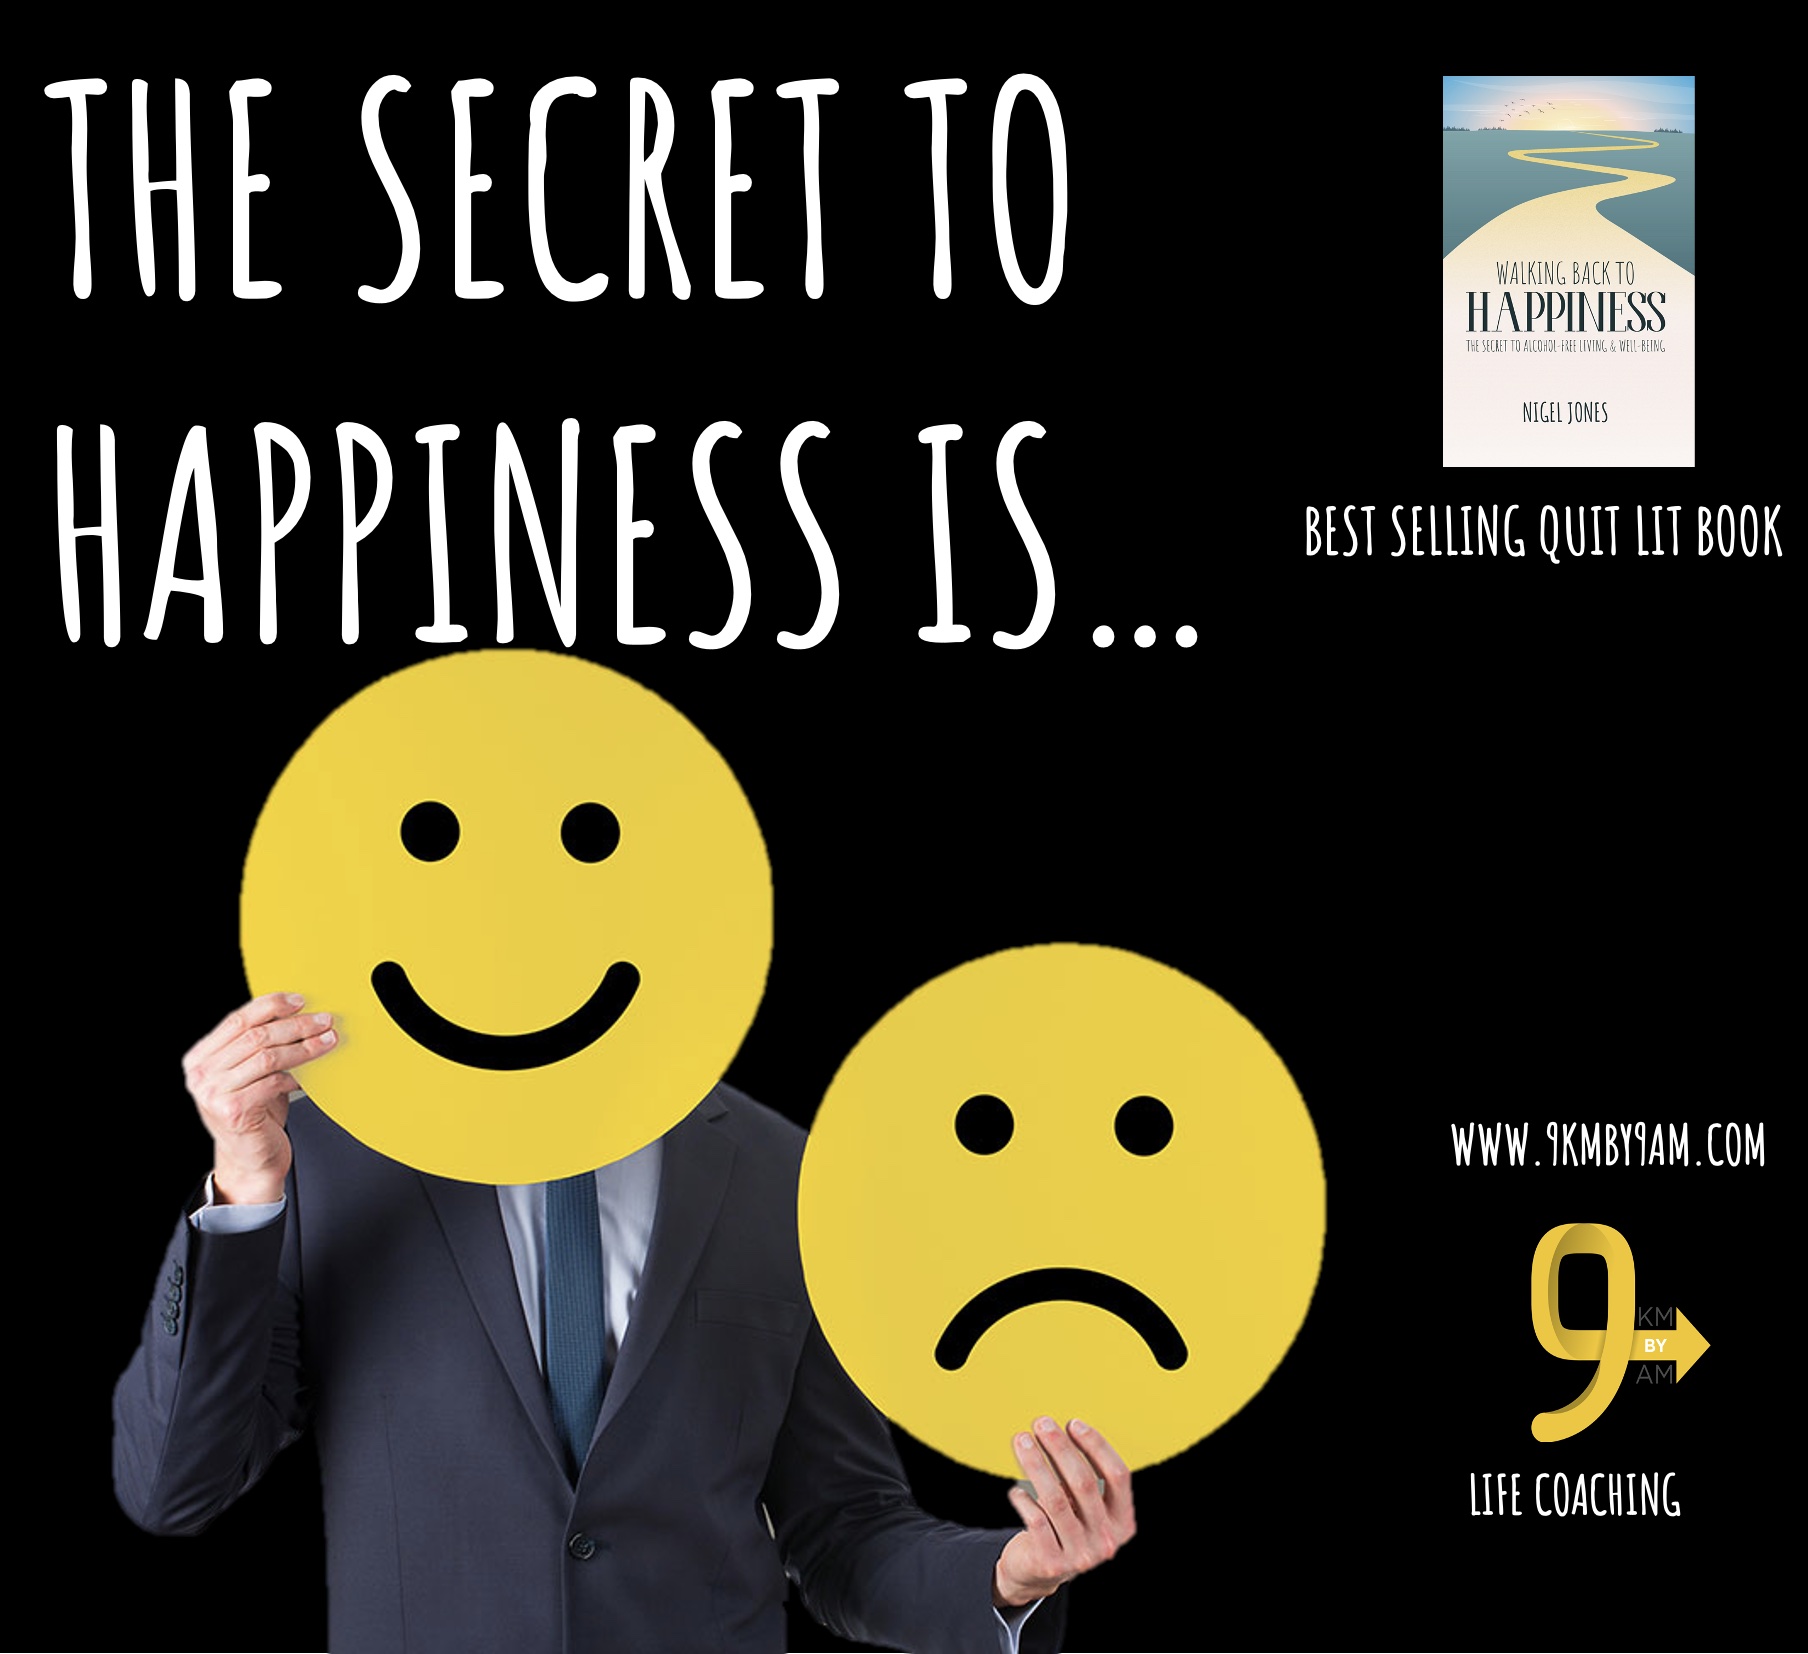 THE SECRET TO HAPPINESS IS…